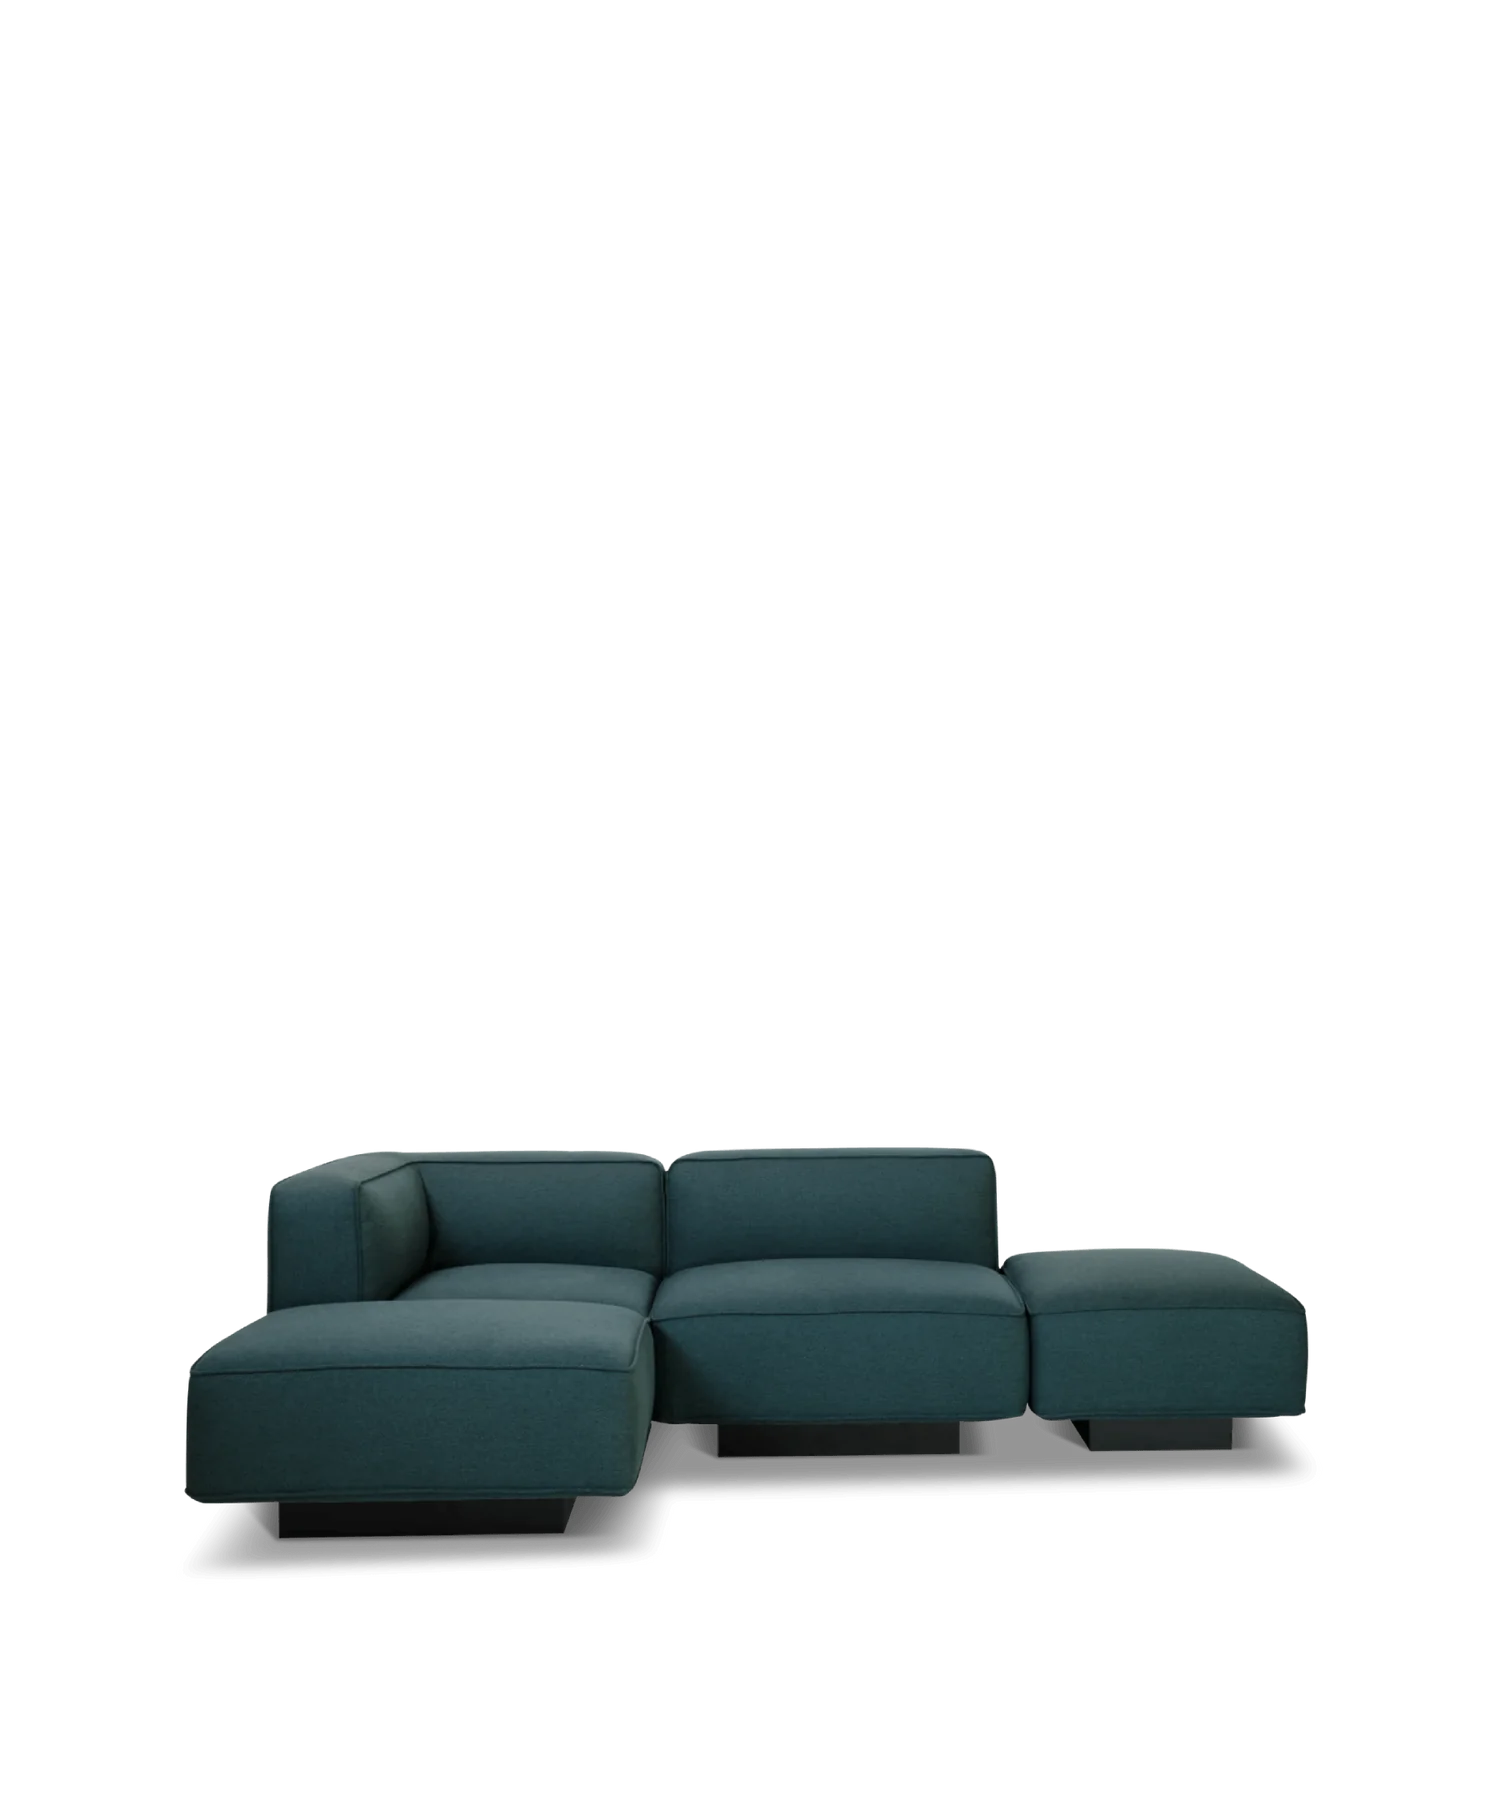 UTOPIA SOFA - OPEN END FOR 2.5 PEOPLE WITH CHAISE LONGUE